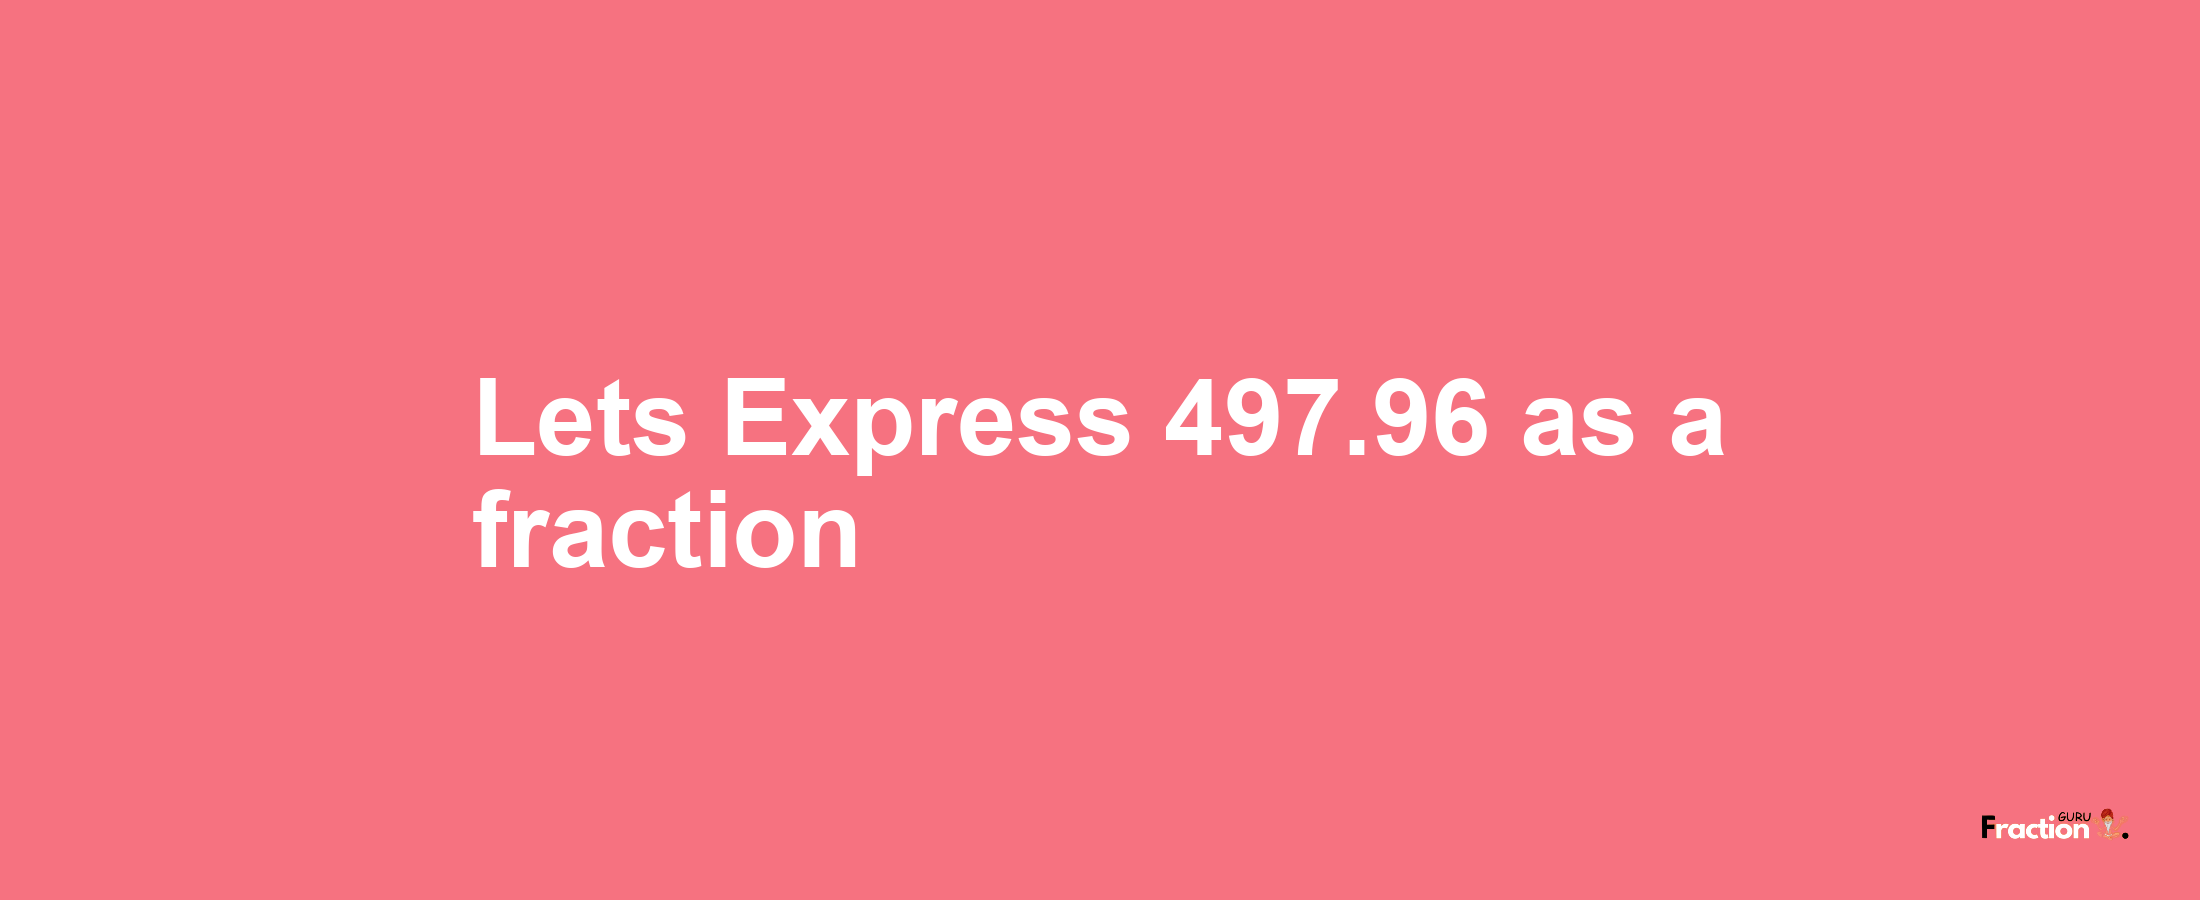 Lets Express 497.96 as afraction